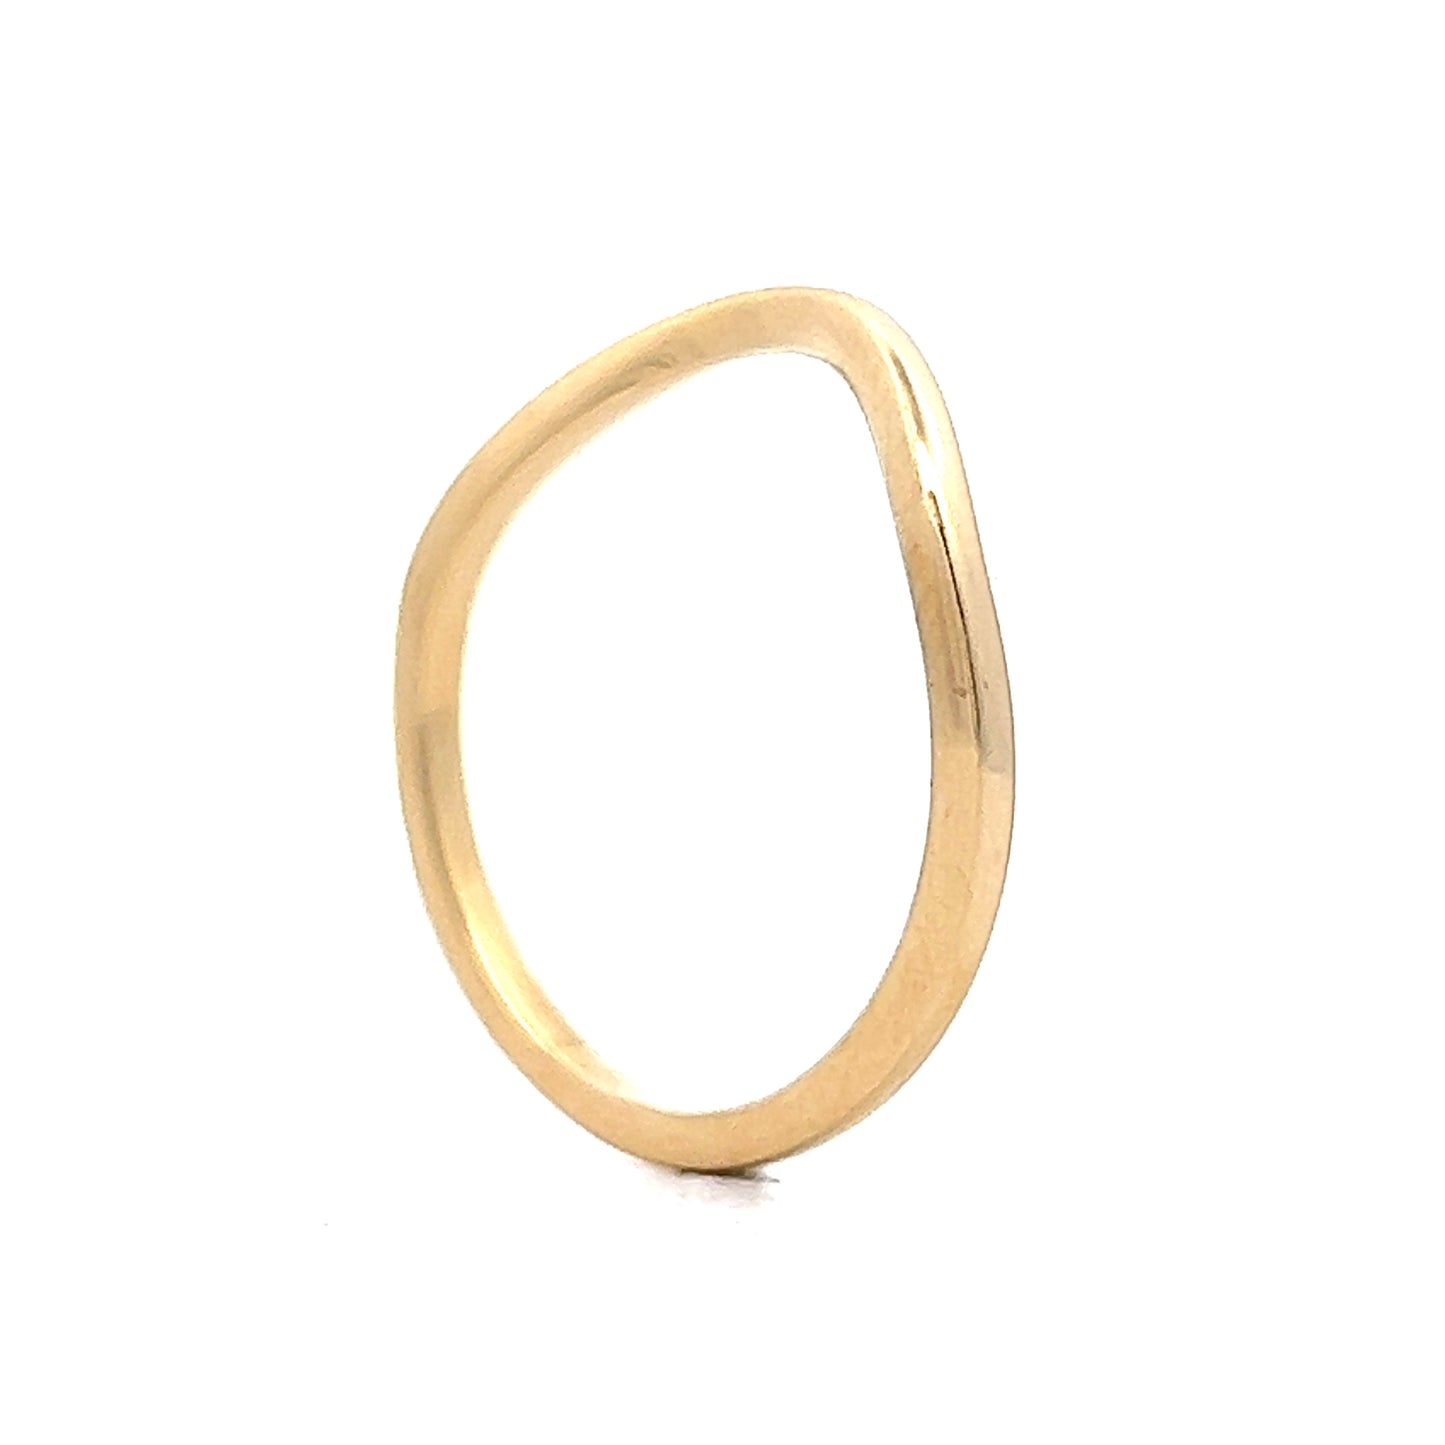 Round Curved Wedding Band in 14k Yellow Gold